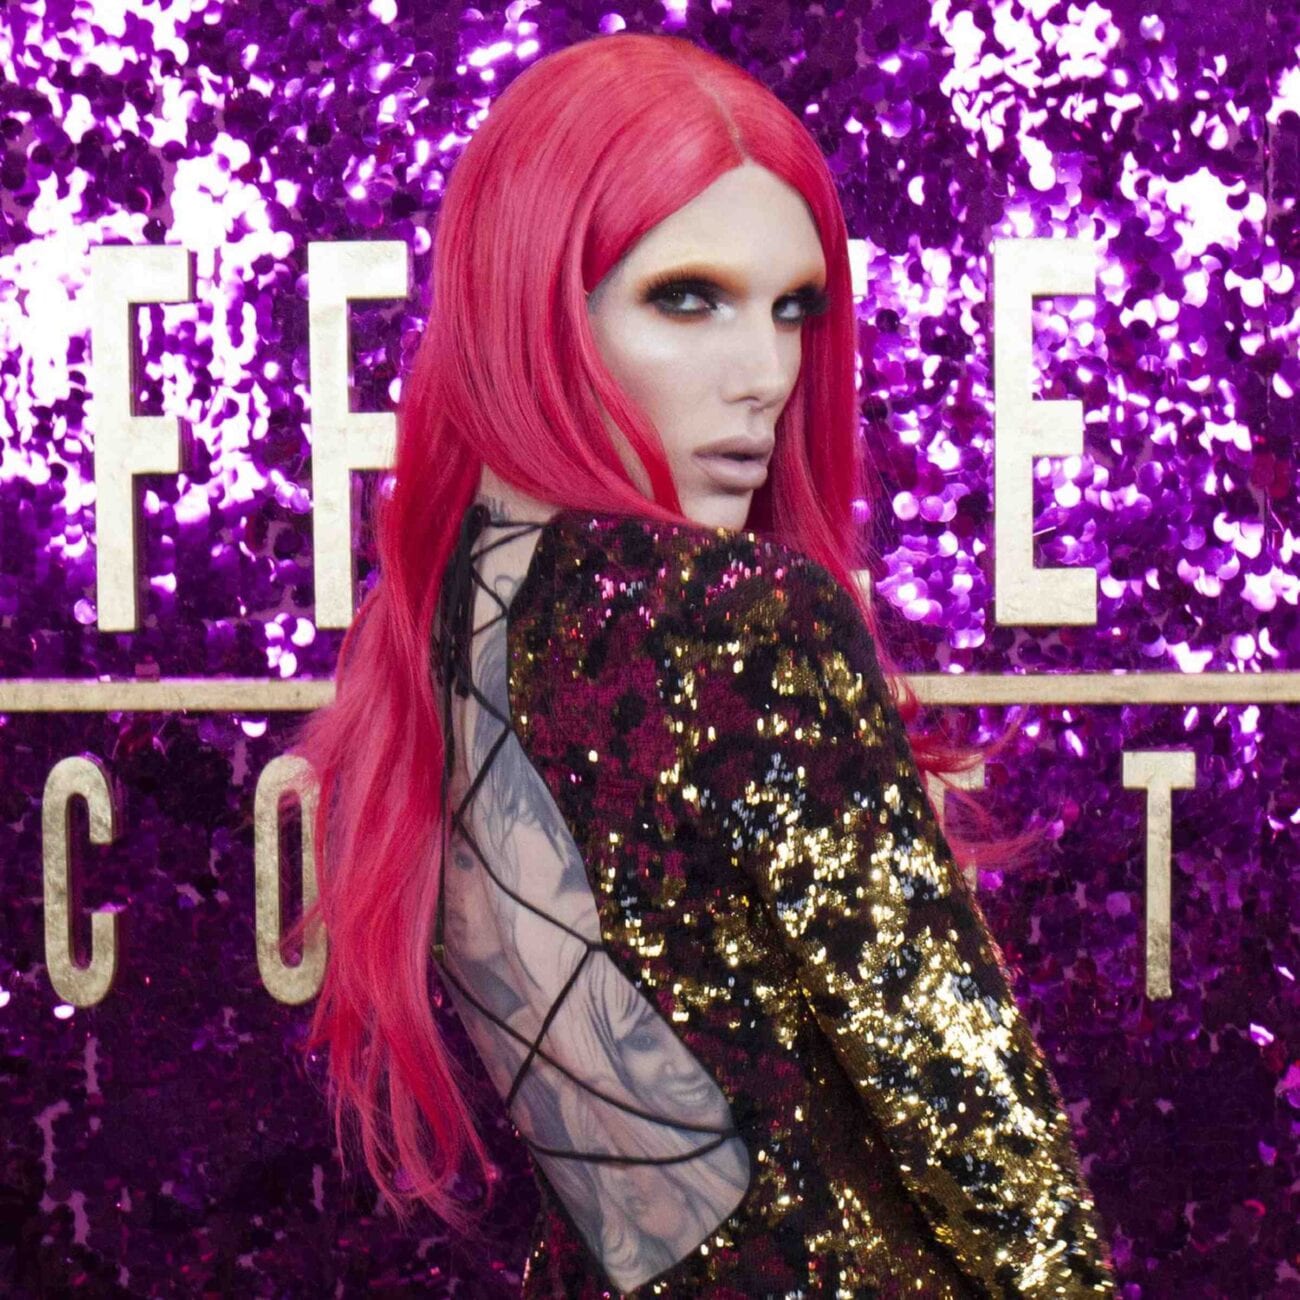 Jeffree Star has been the center of drama on multiple social media platforms, recently he addressed some Twitter scandals in a YouTube video.